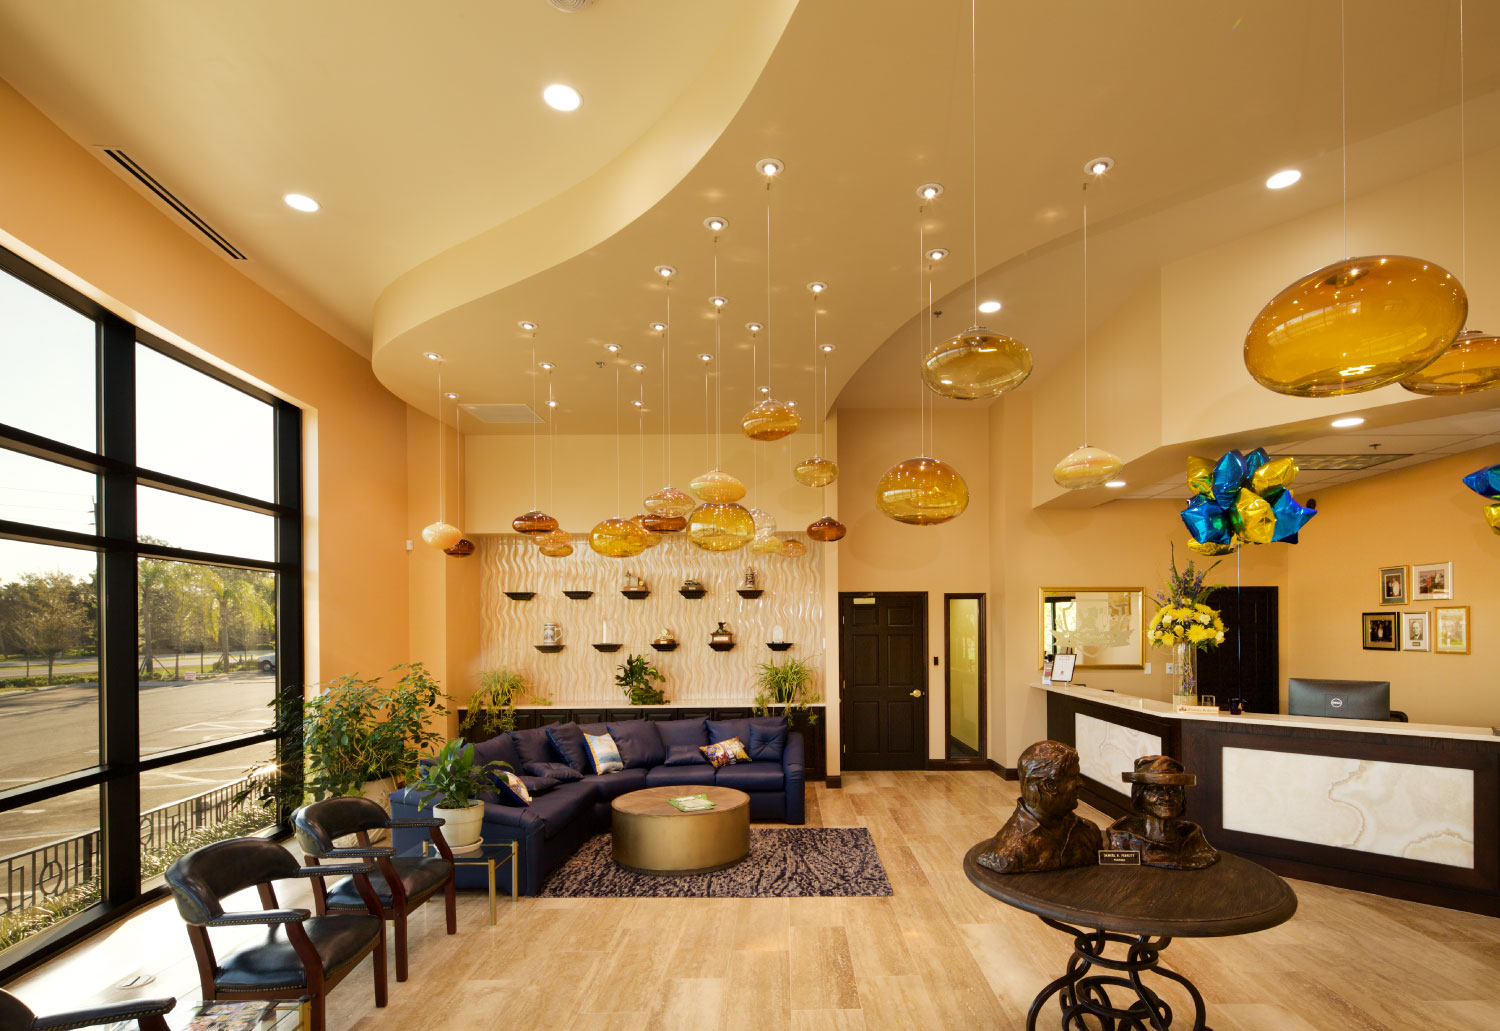 Lobby at SR Perrott Distribution Facility Built by ARCO Beverage Group in Florida